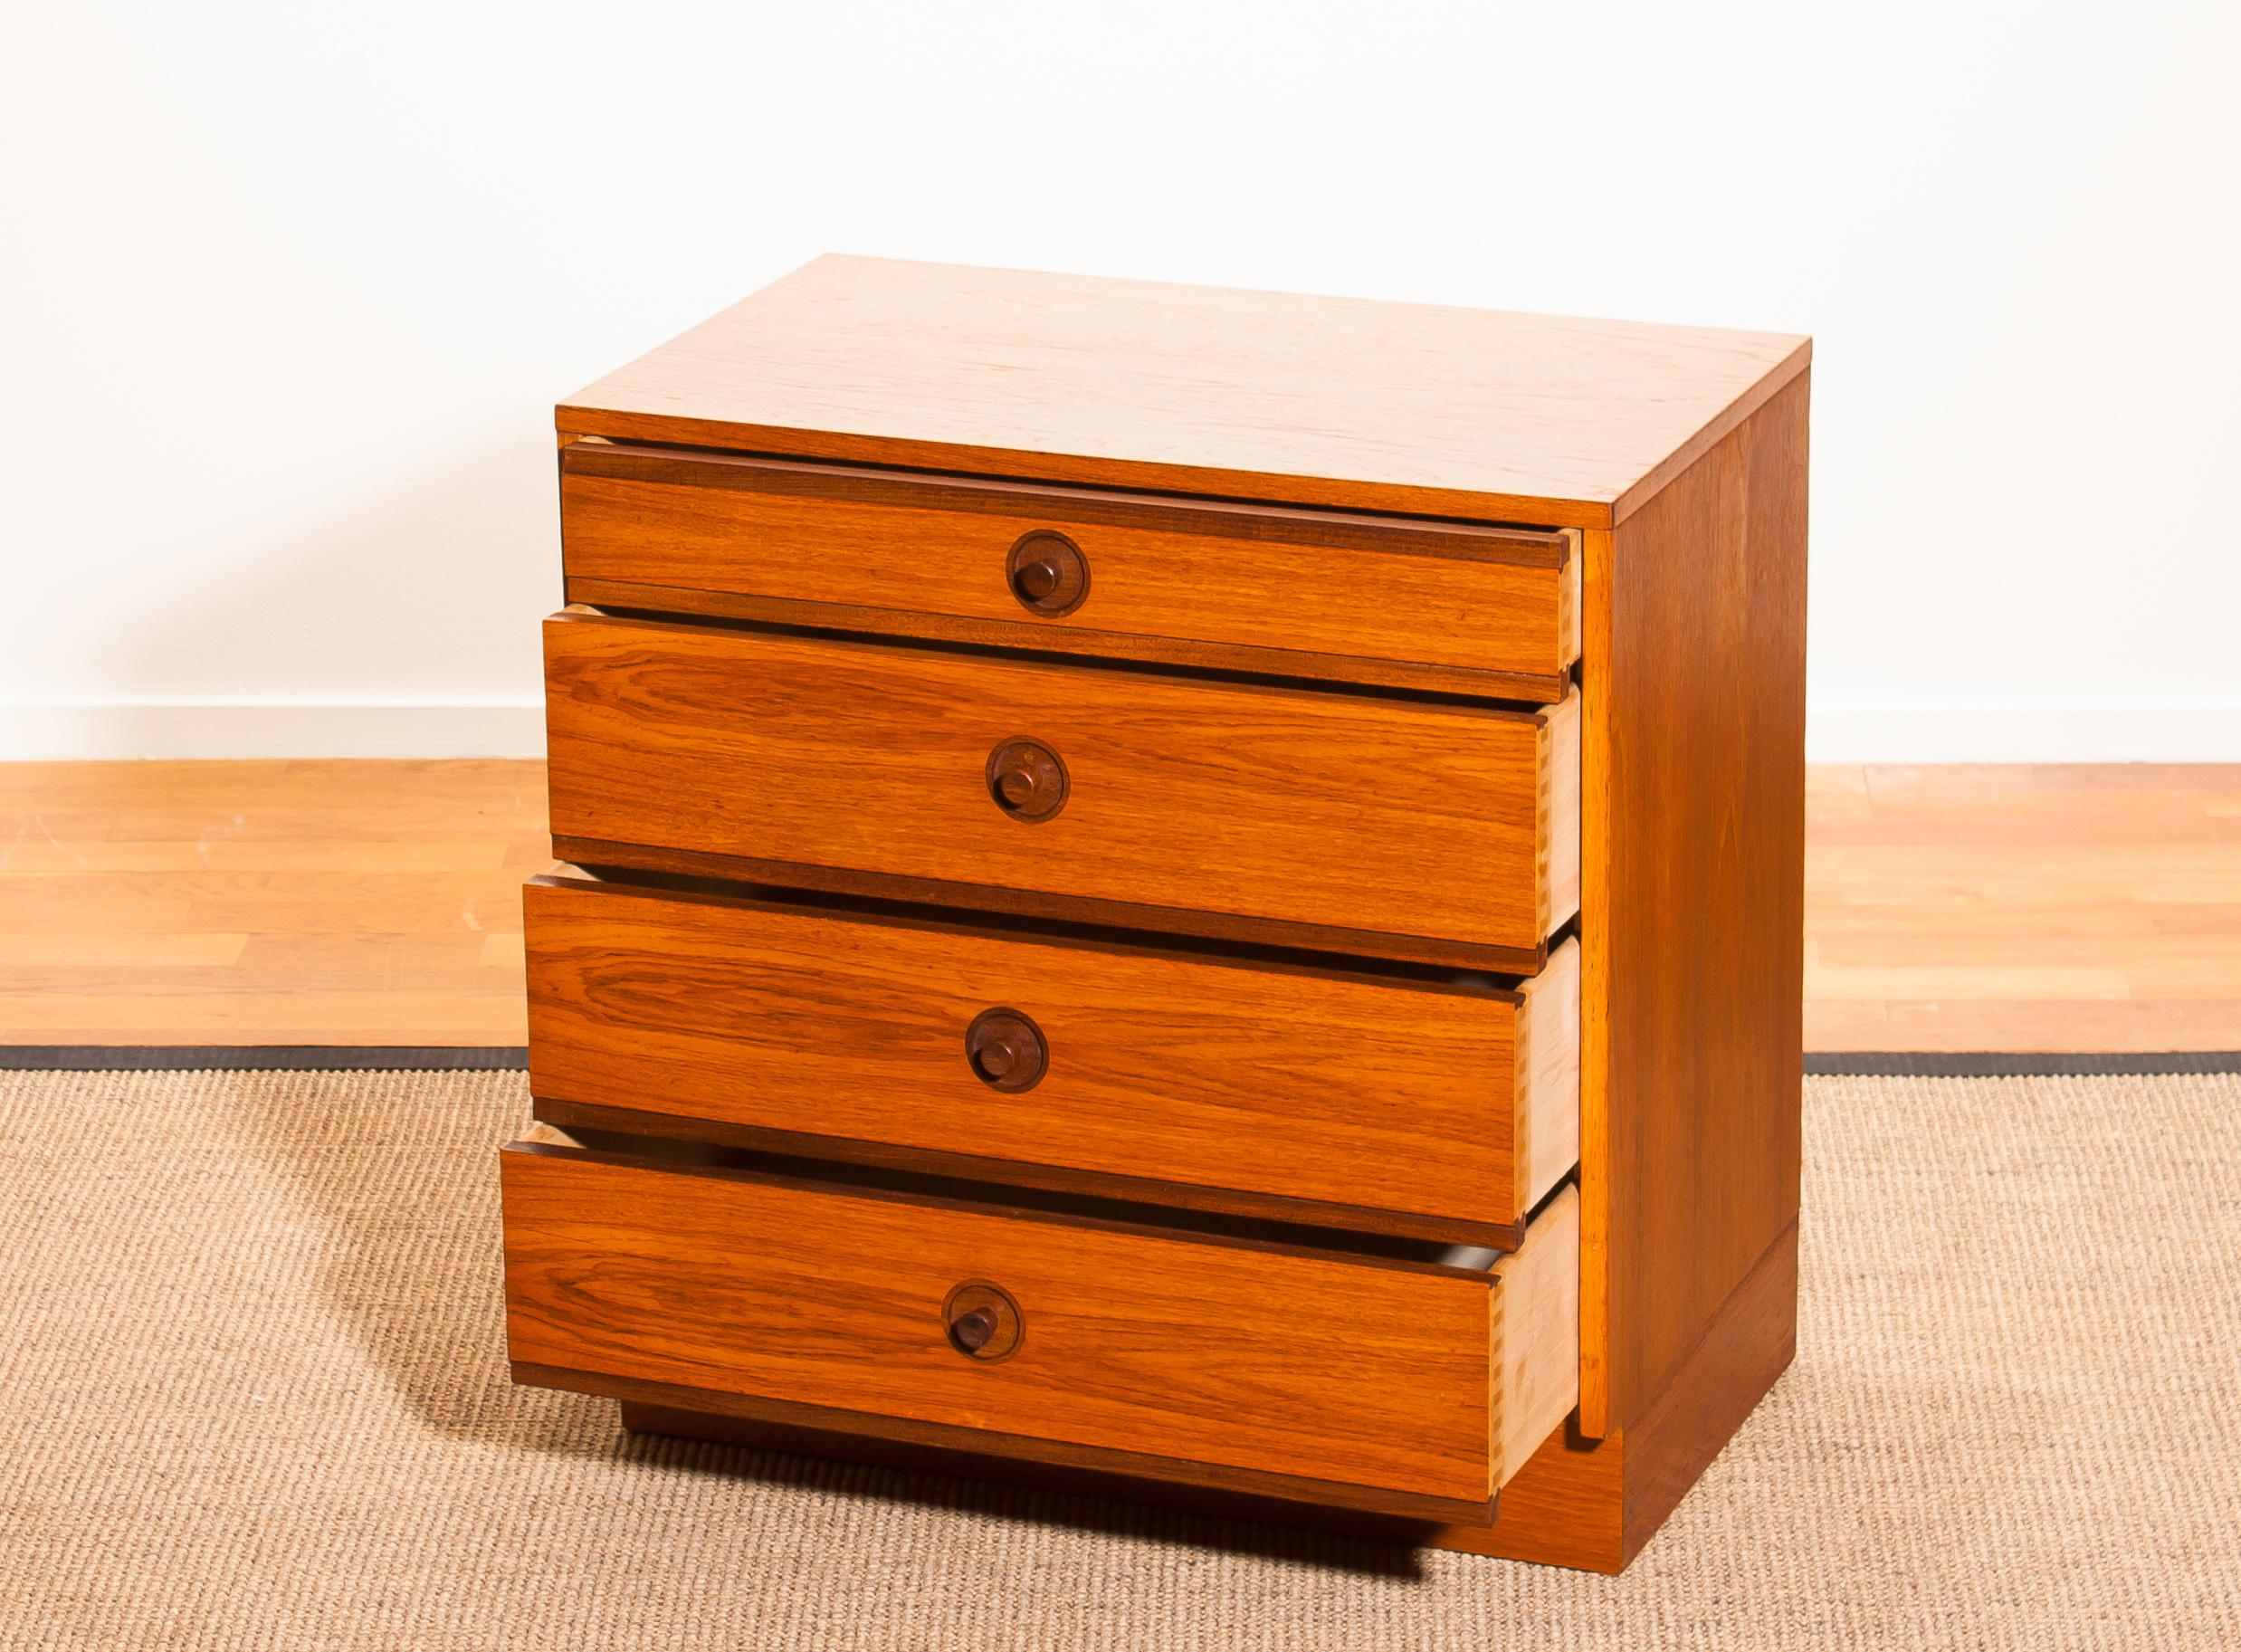 Very nice chest of drawers by Børge Mogensen for Karl Andersson & Söner, Denmark.
This cabinet is made of teak and has four drawers.
It is in beautiful condition.
Period 1950s.
Dimensions: H 68 cm x W 66 cm x D 40 cm.